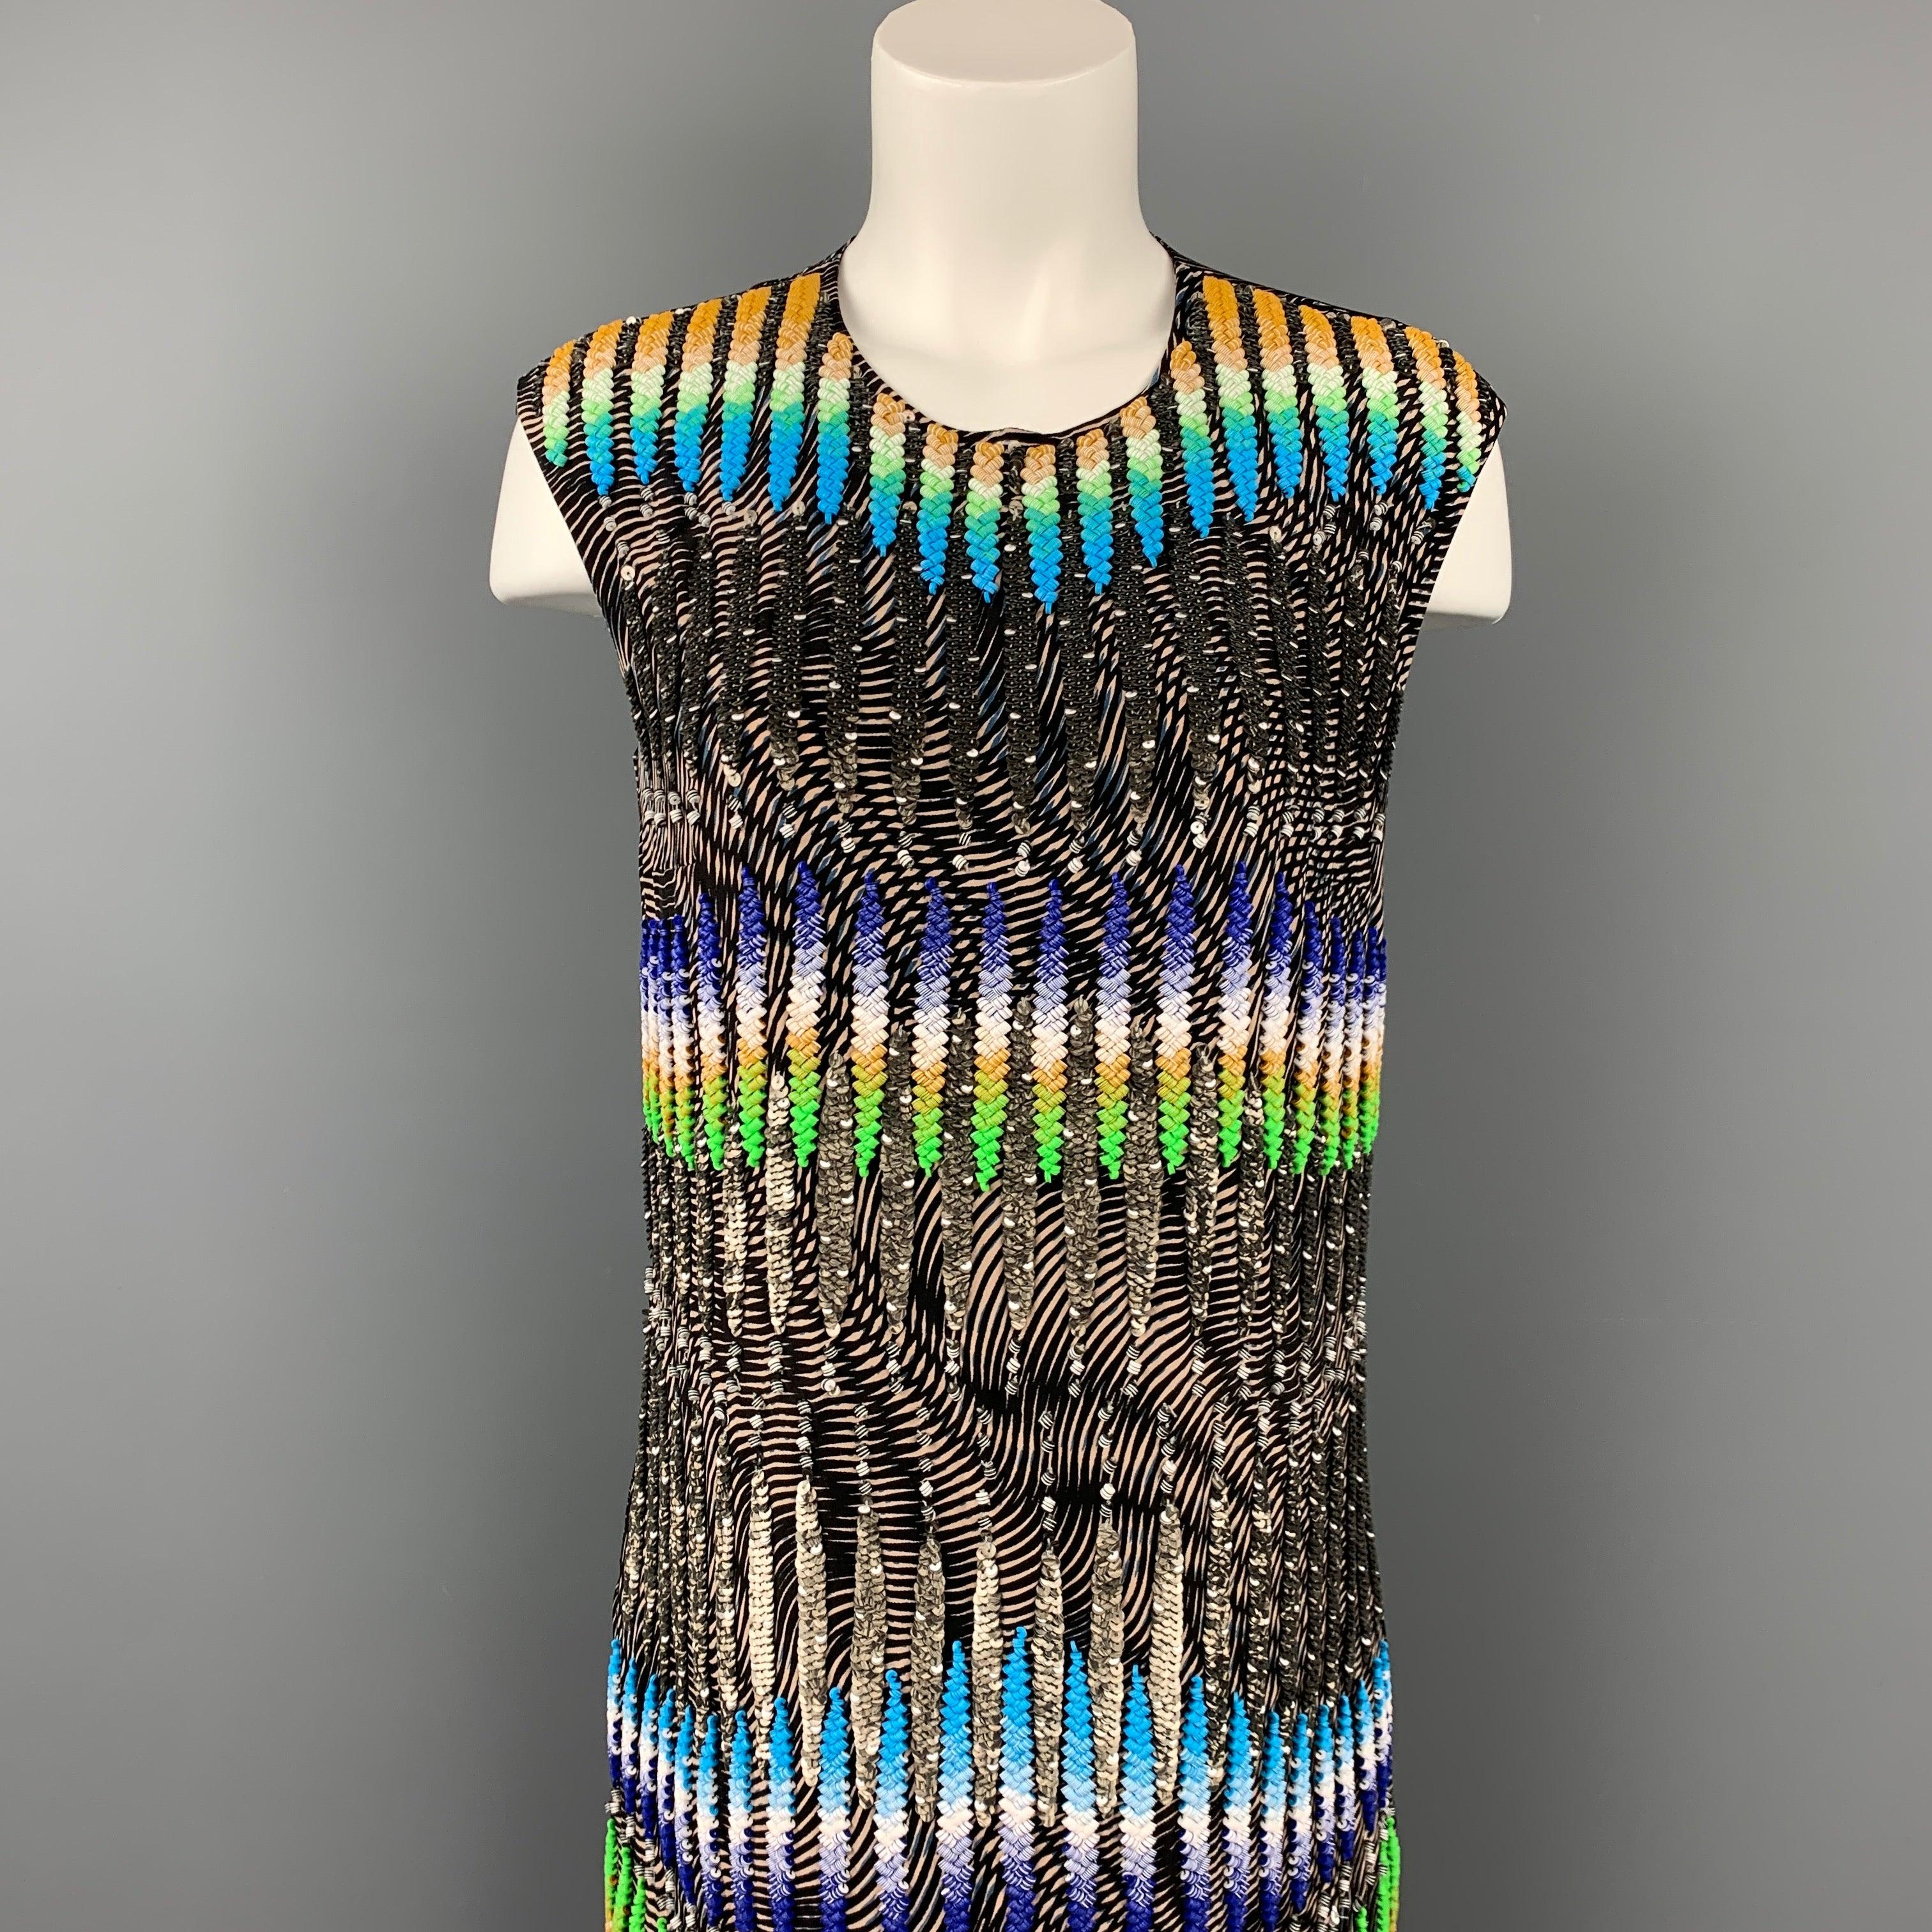 PETER PILOTTO dress comes in a black silk with sequined details featuring beaded designs made by hand, shift style, sleeveless, and a back zip up closure.
Very Good
Pre-Owned Condition. 

Marked:   10 

Measurements: 
 
Shoulder: 16.5 inches  Bust: